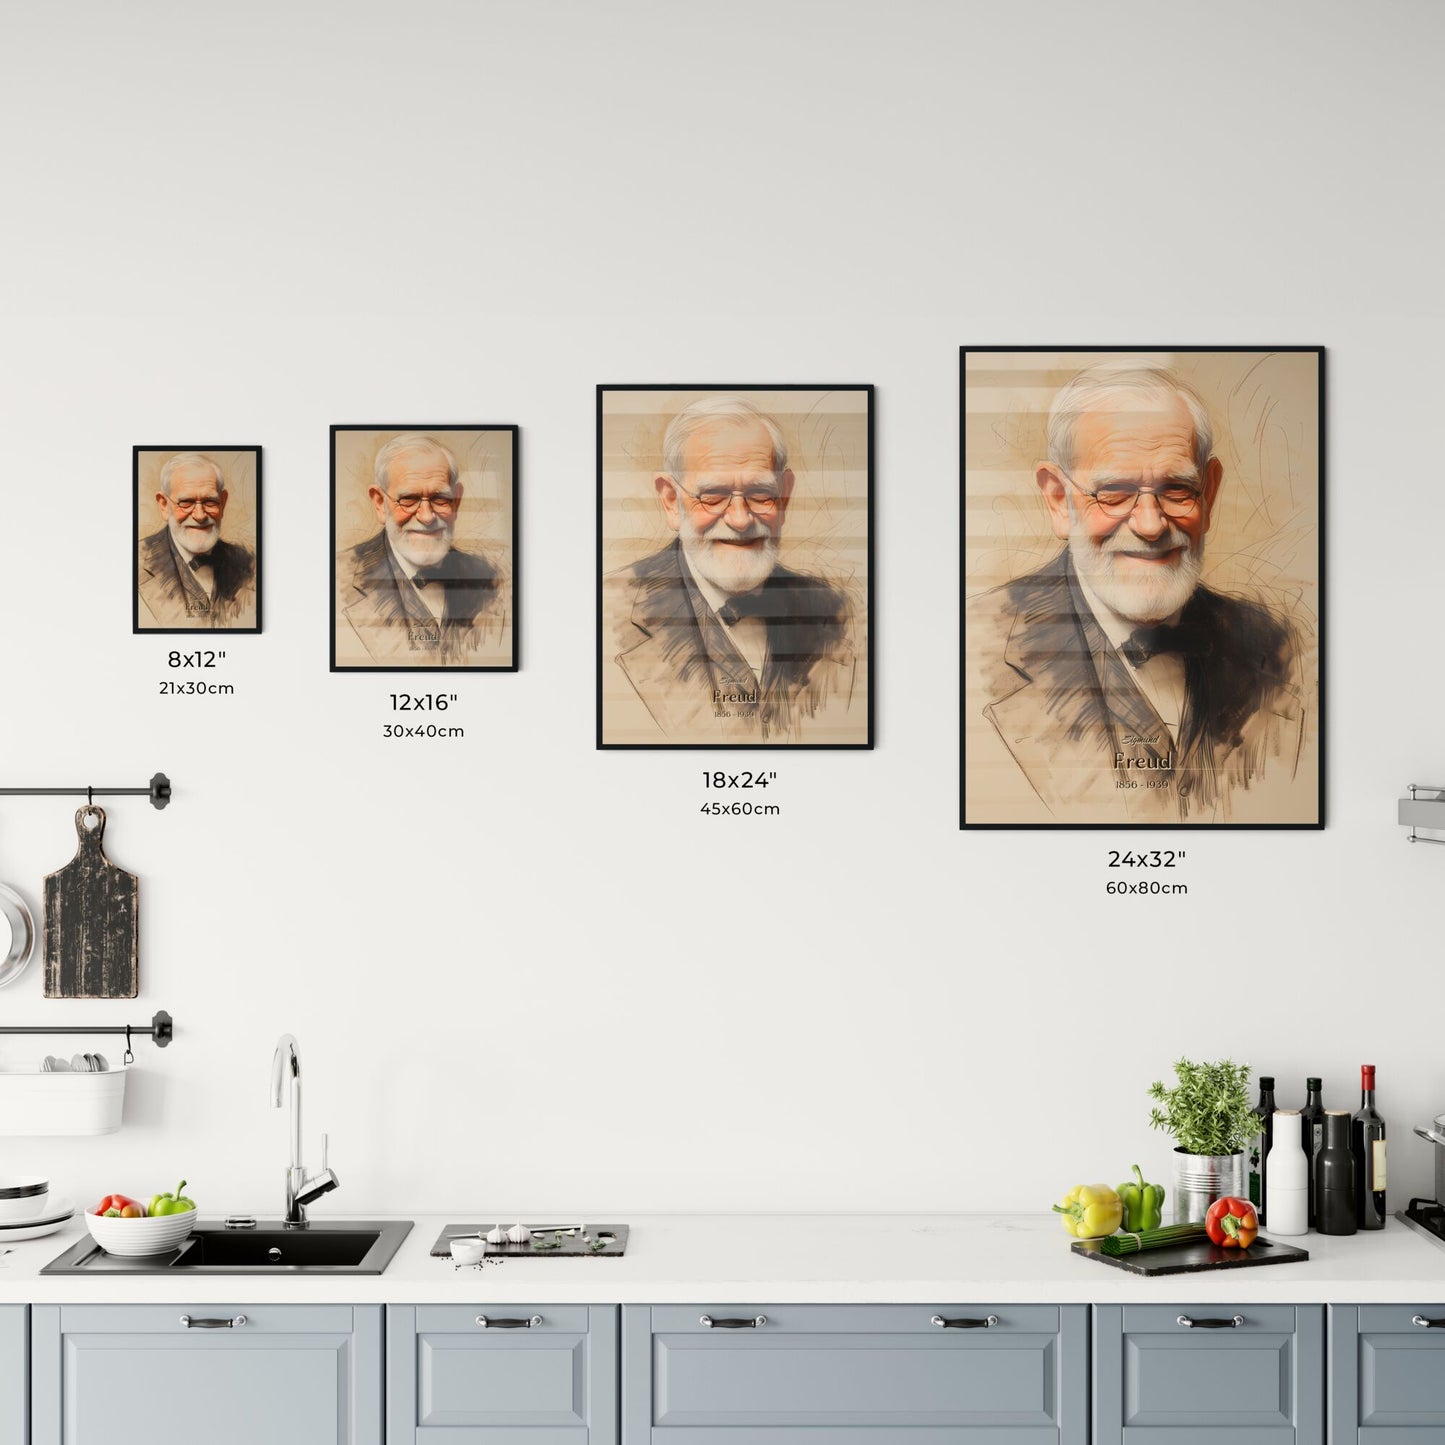 Sigmund, Freud, 1856 - 1939, A Poster of a man with a beard and glasses Default Title